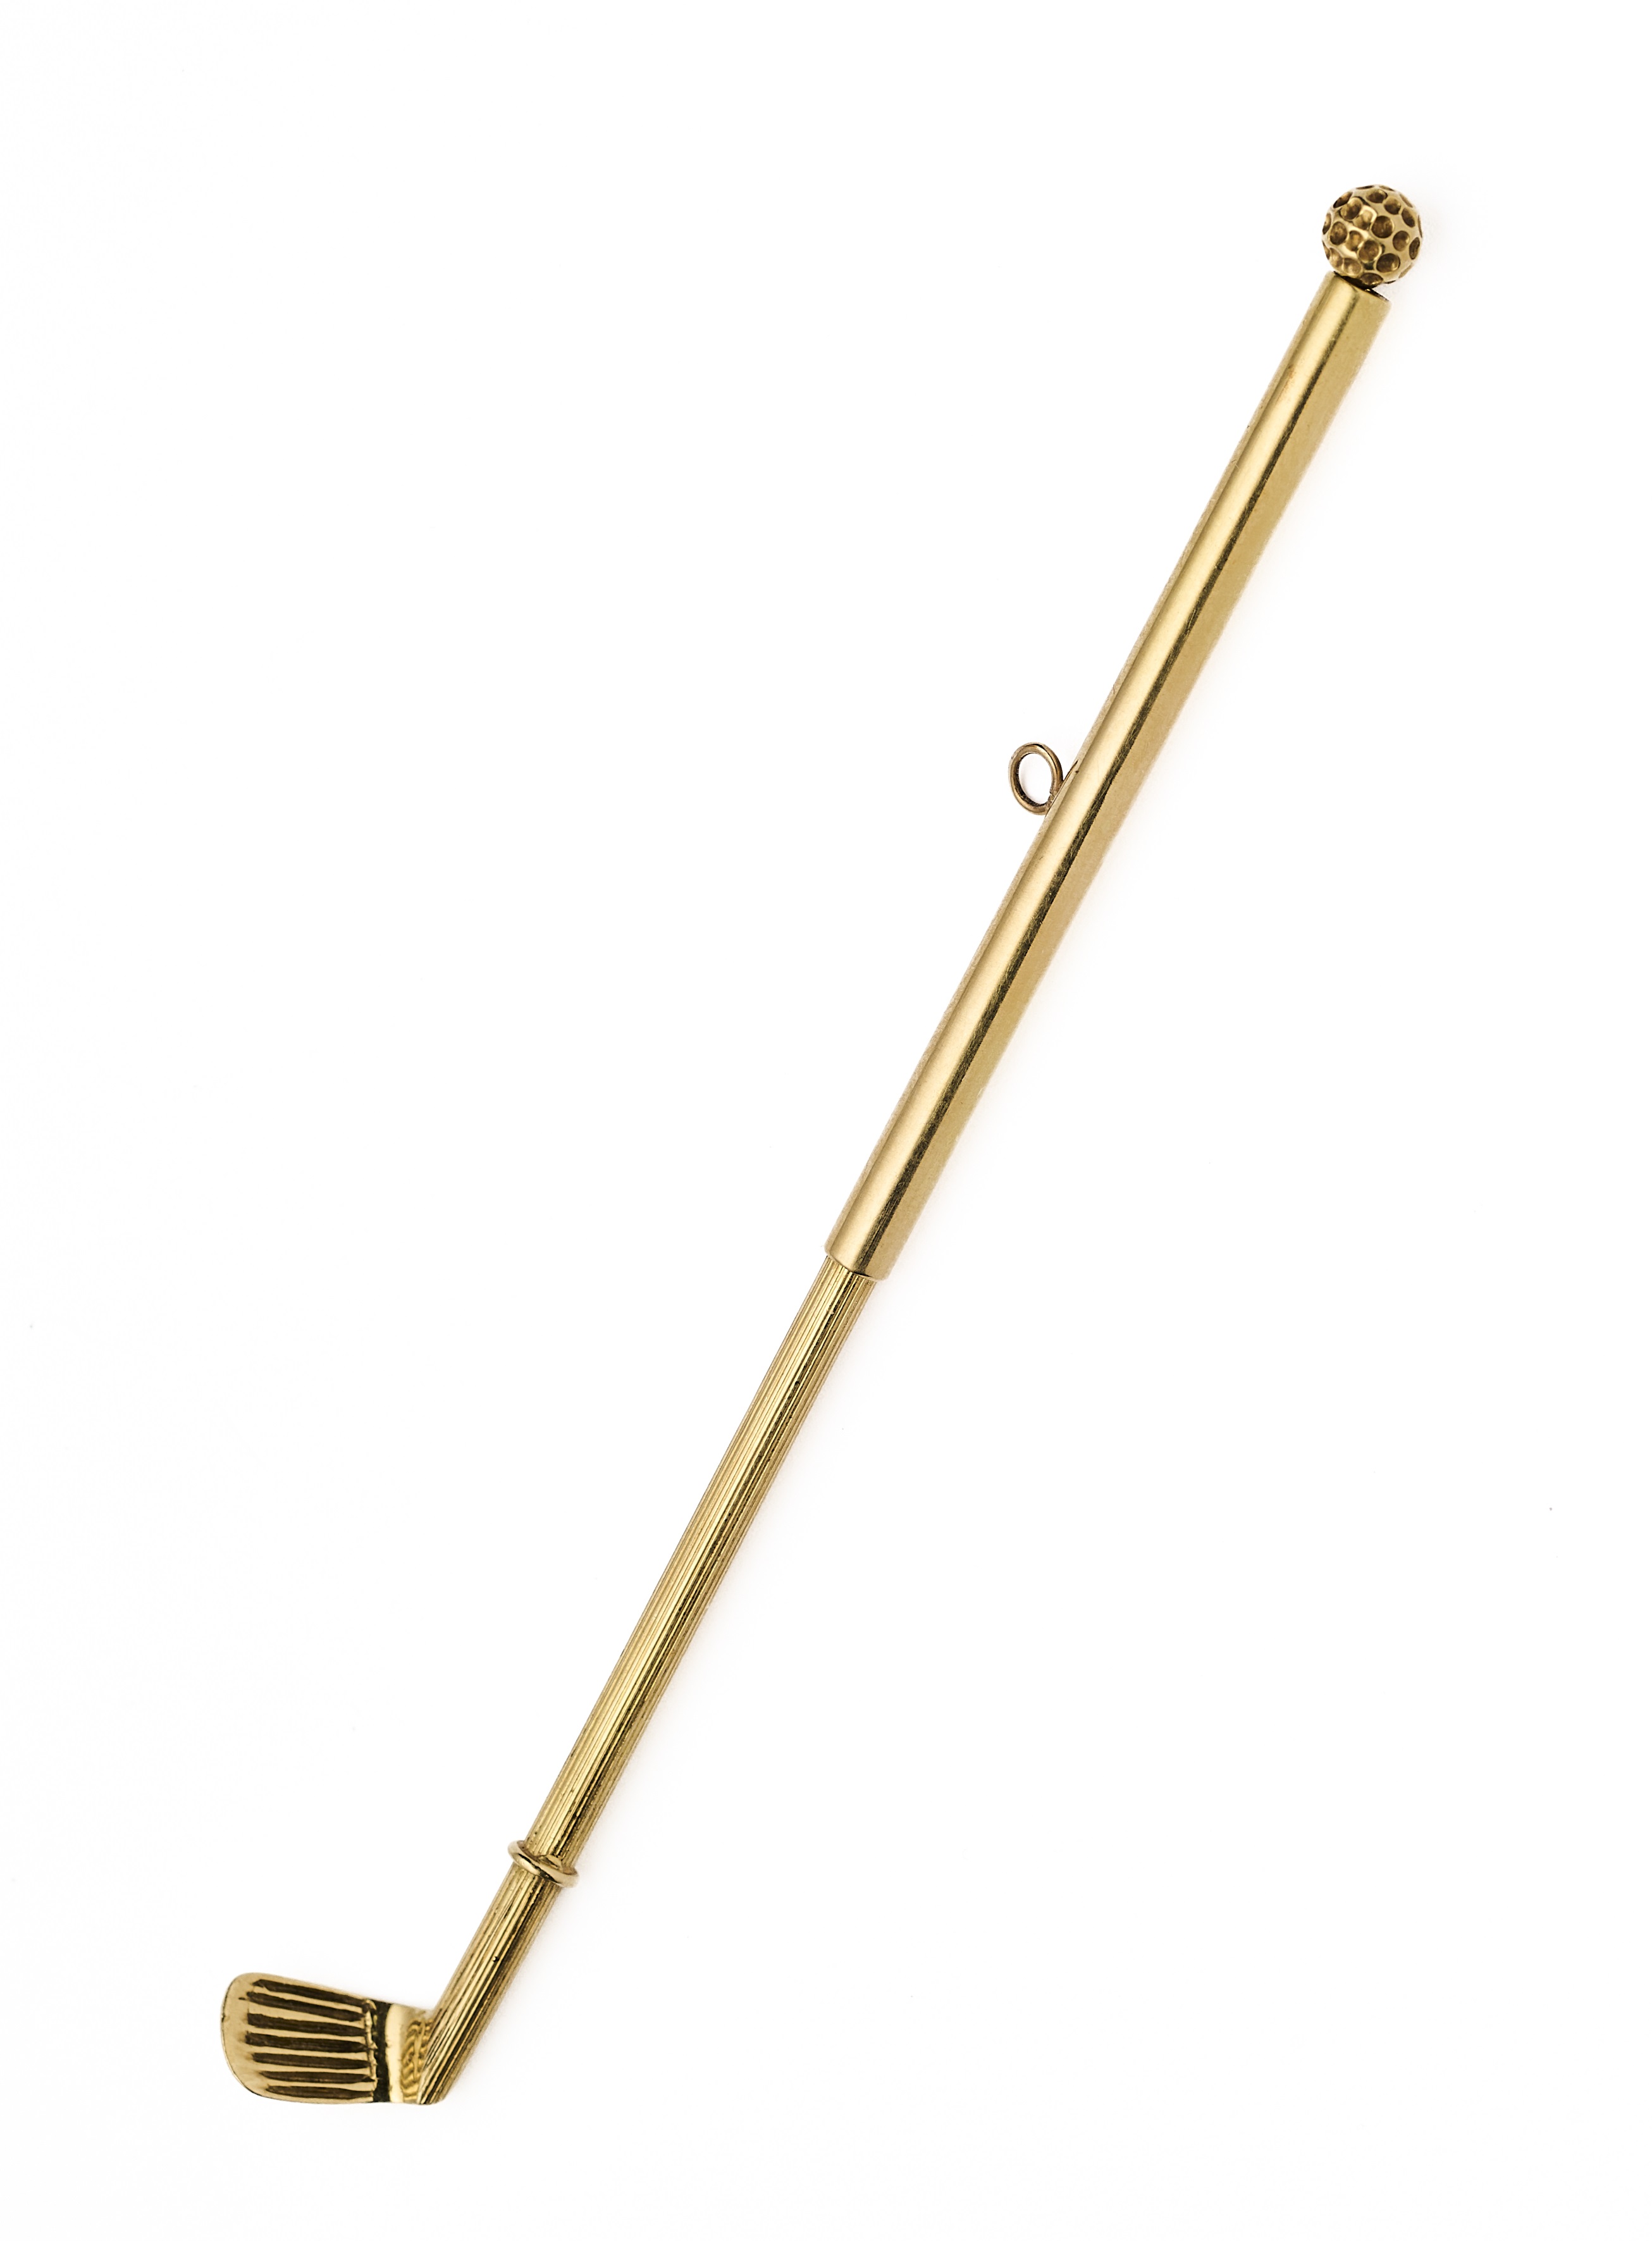 AN AMERICAN GOLD NOVELTY SWIZZLE STICK, CHERNY, MID 20TH CENTURY